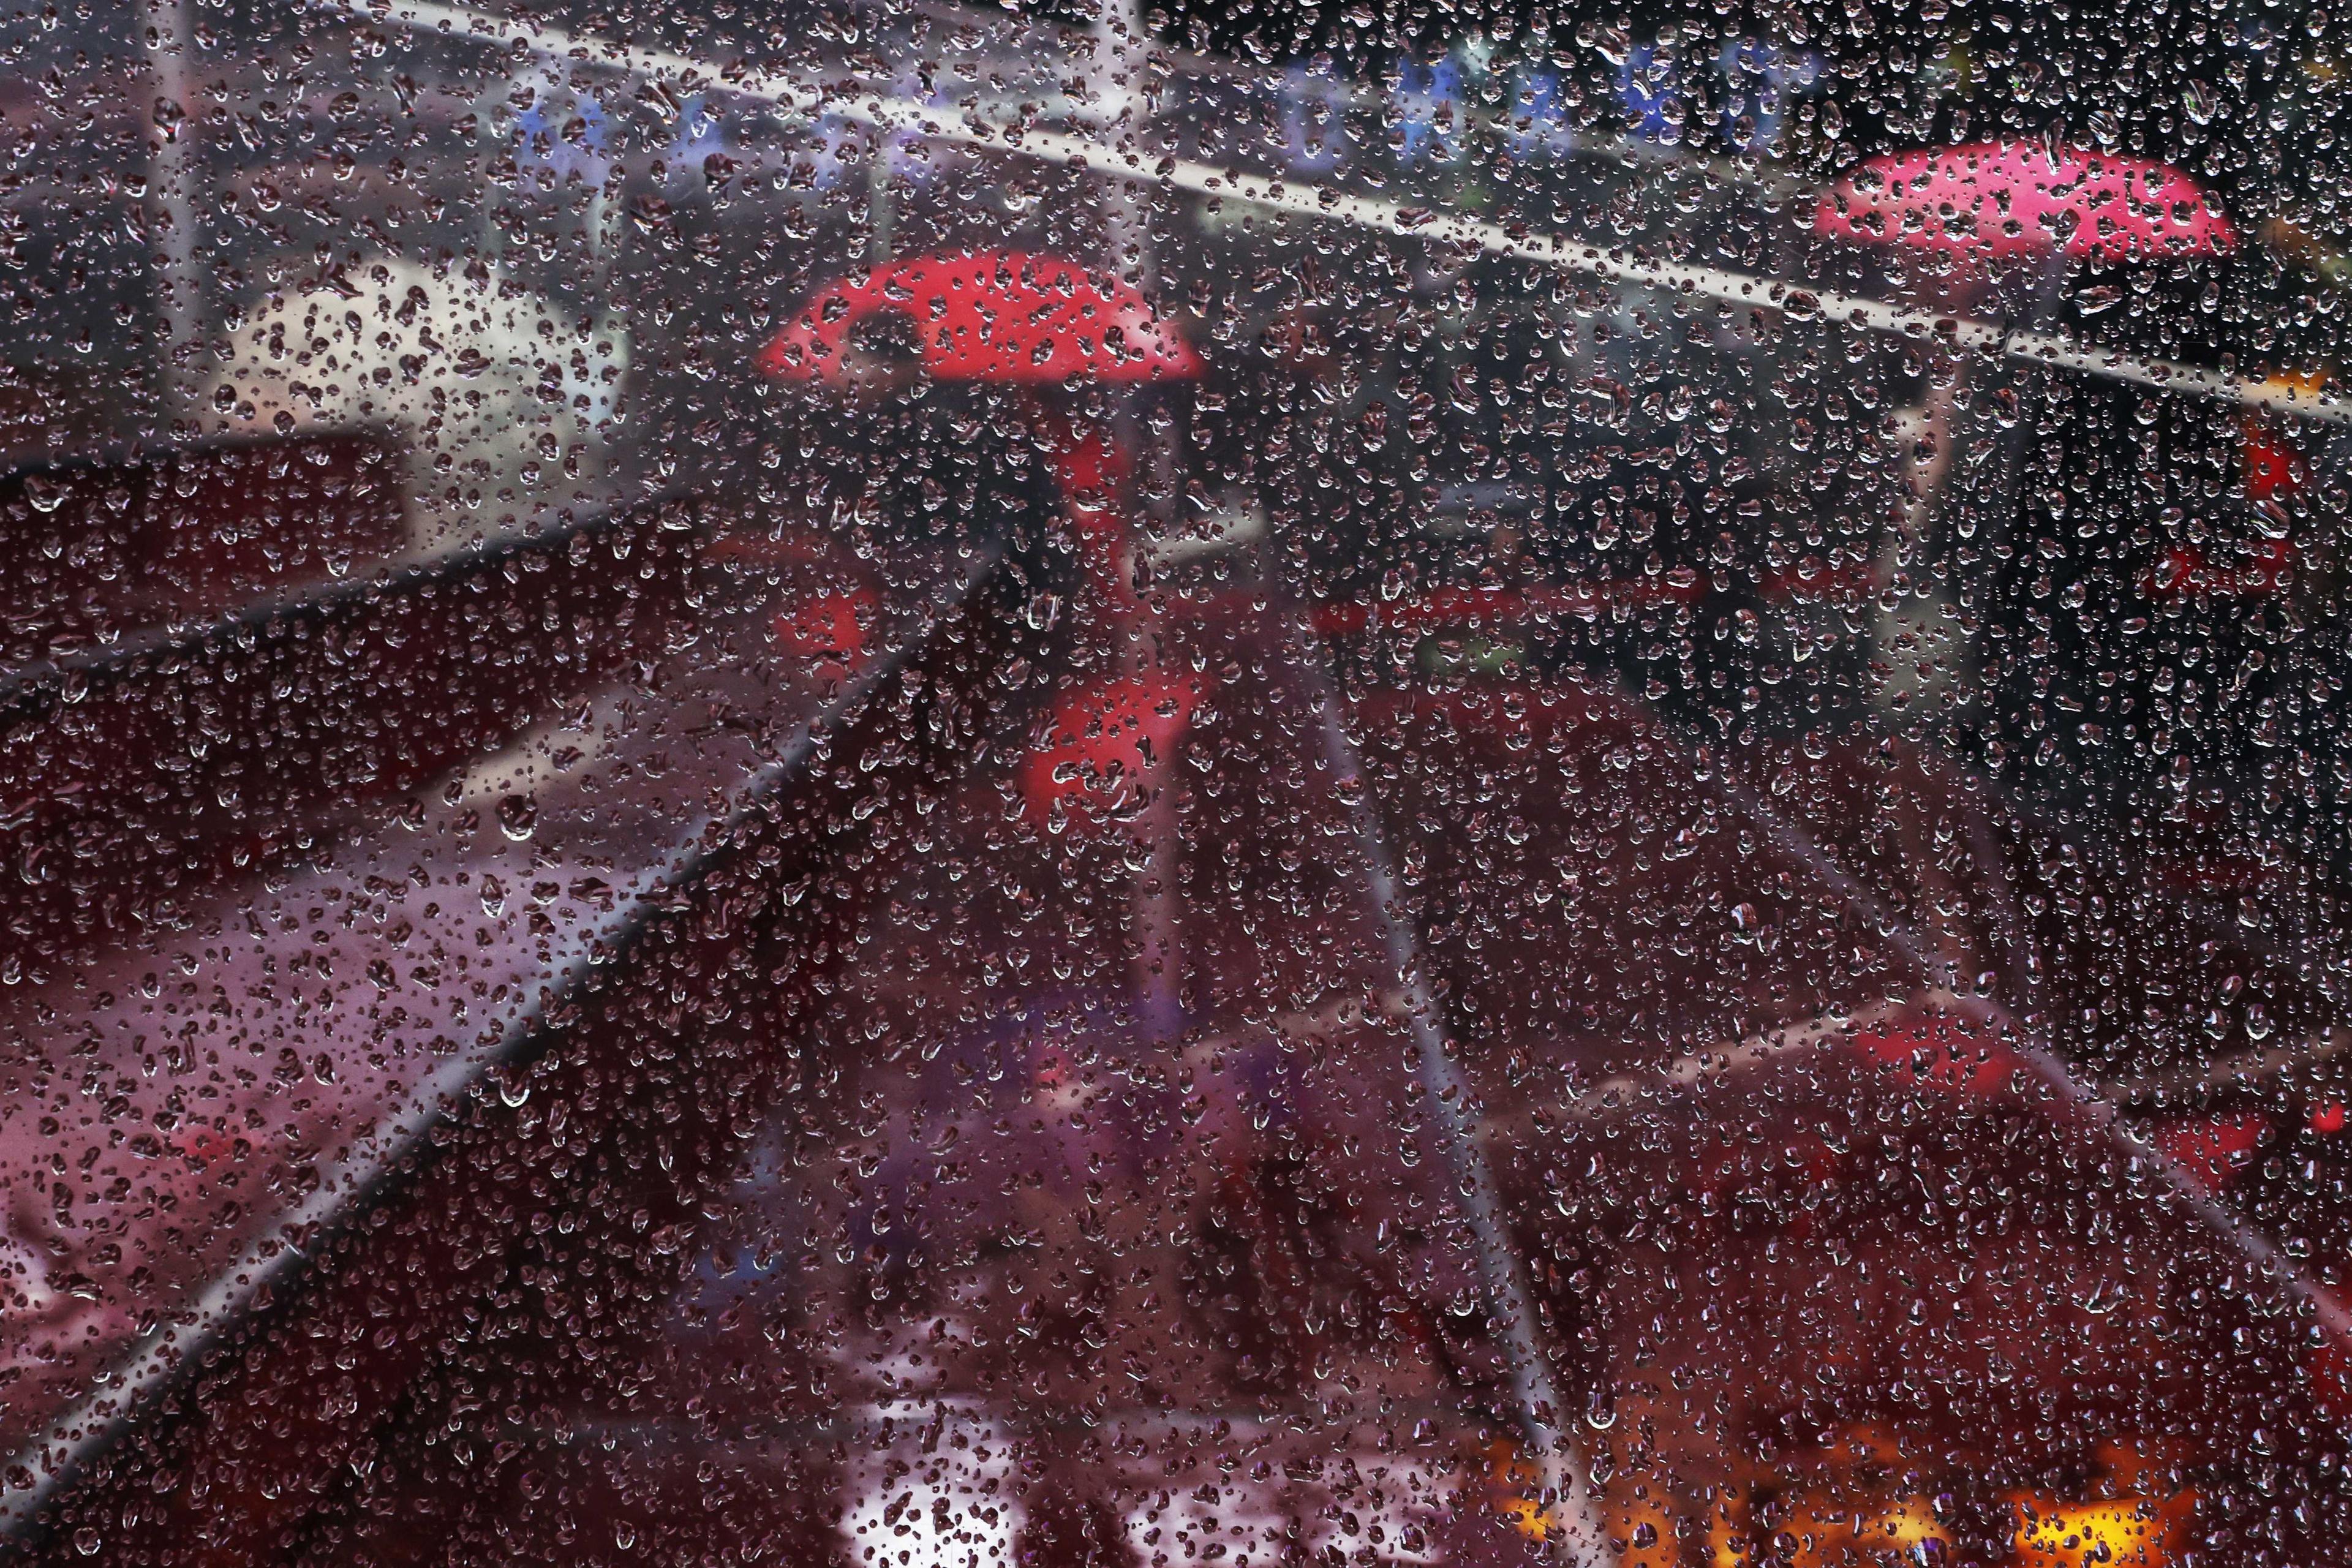 People are seen through rain drops waiting in line with umbrellas during rain in the Times Square section of New York City, US, Jan 19. Photo: Reuters